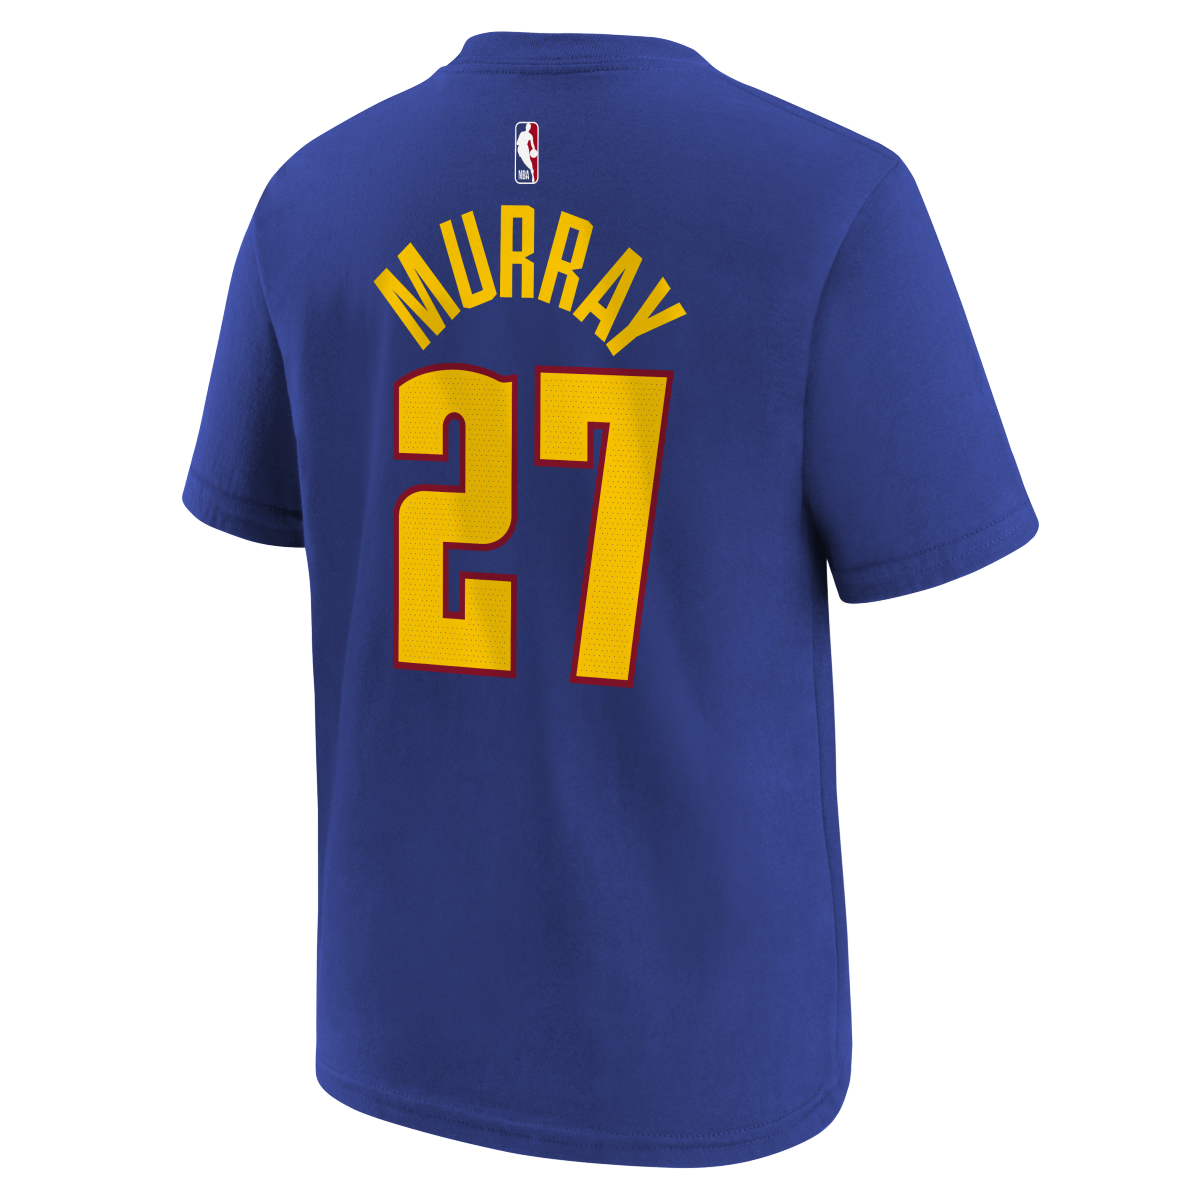 Nuggets Youth Statement Player Tee